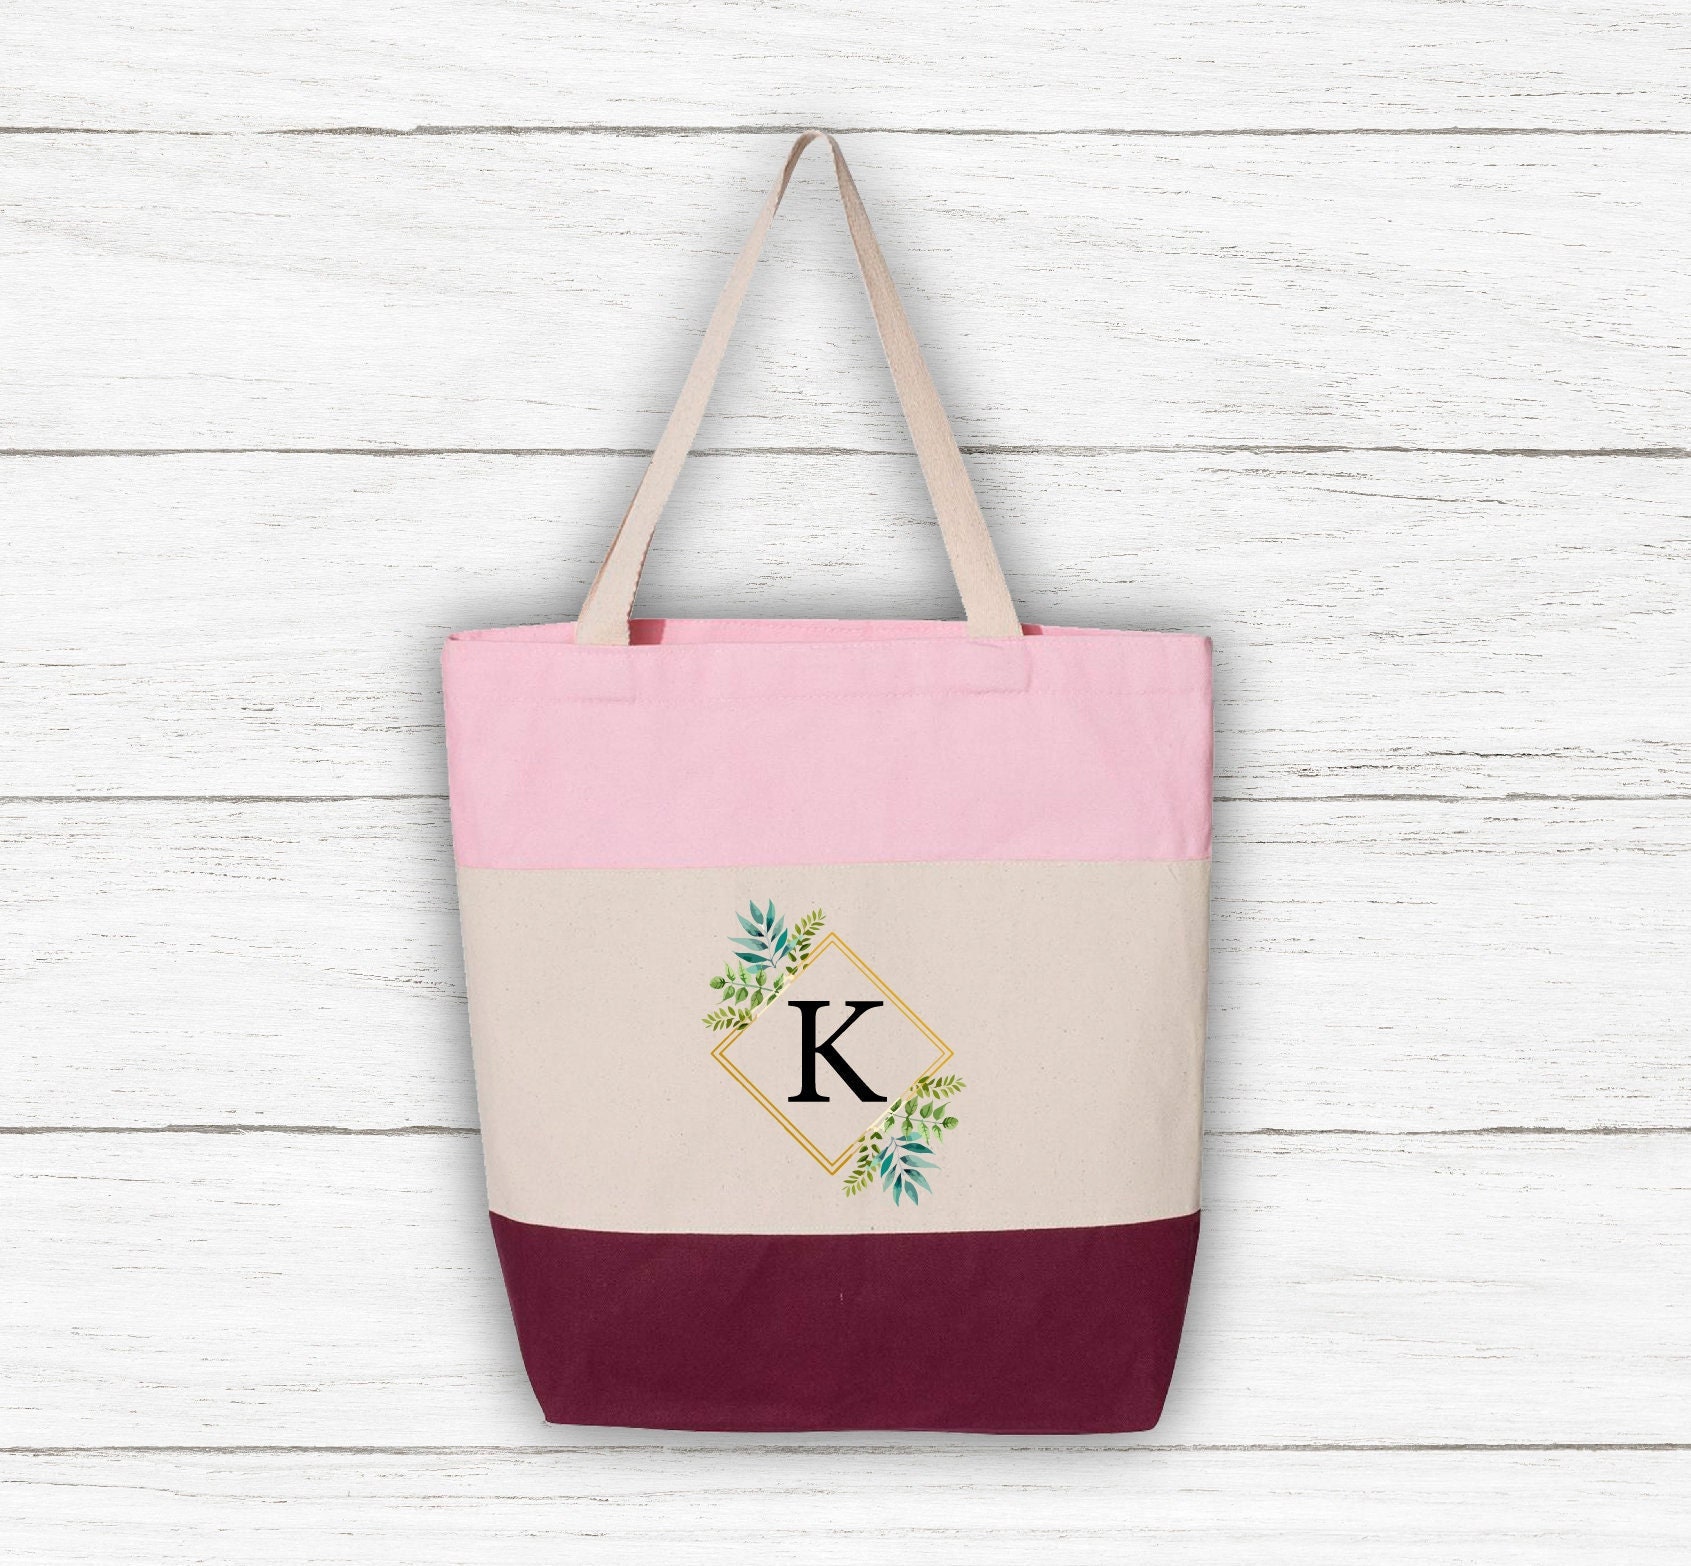 Floral Name Design, Personalized Tote Bag – Initial Outfitters